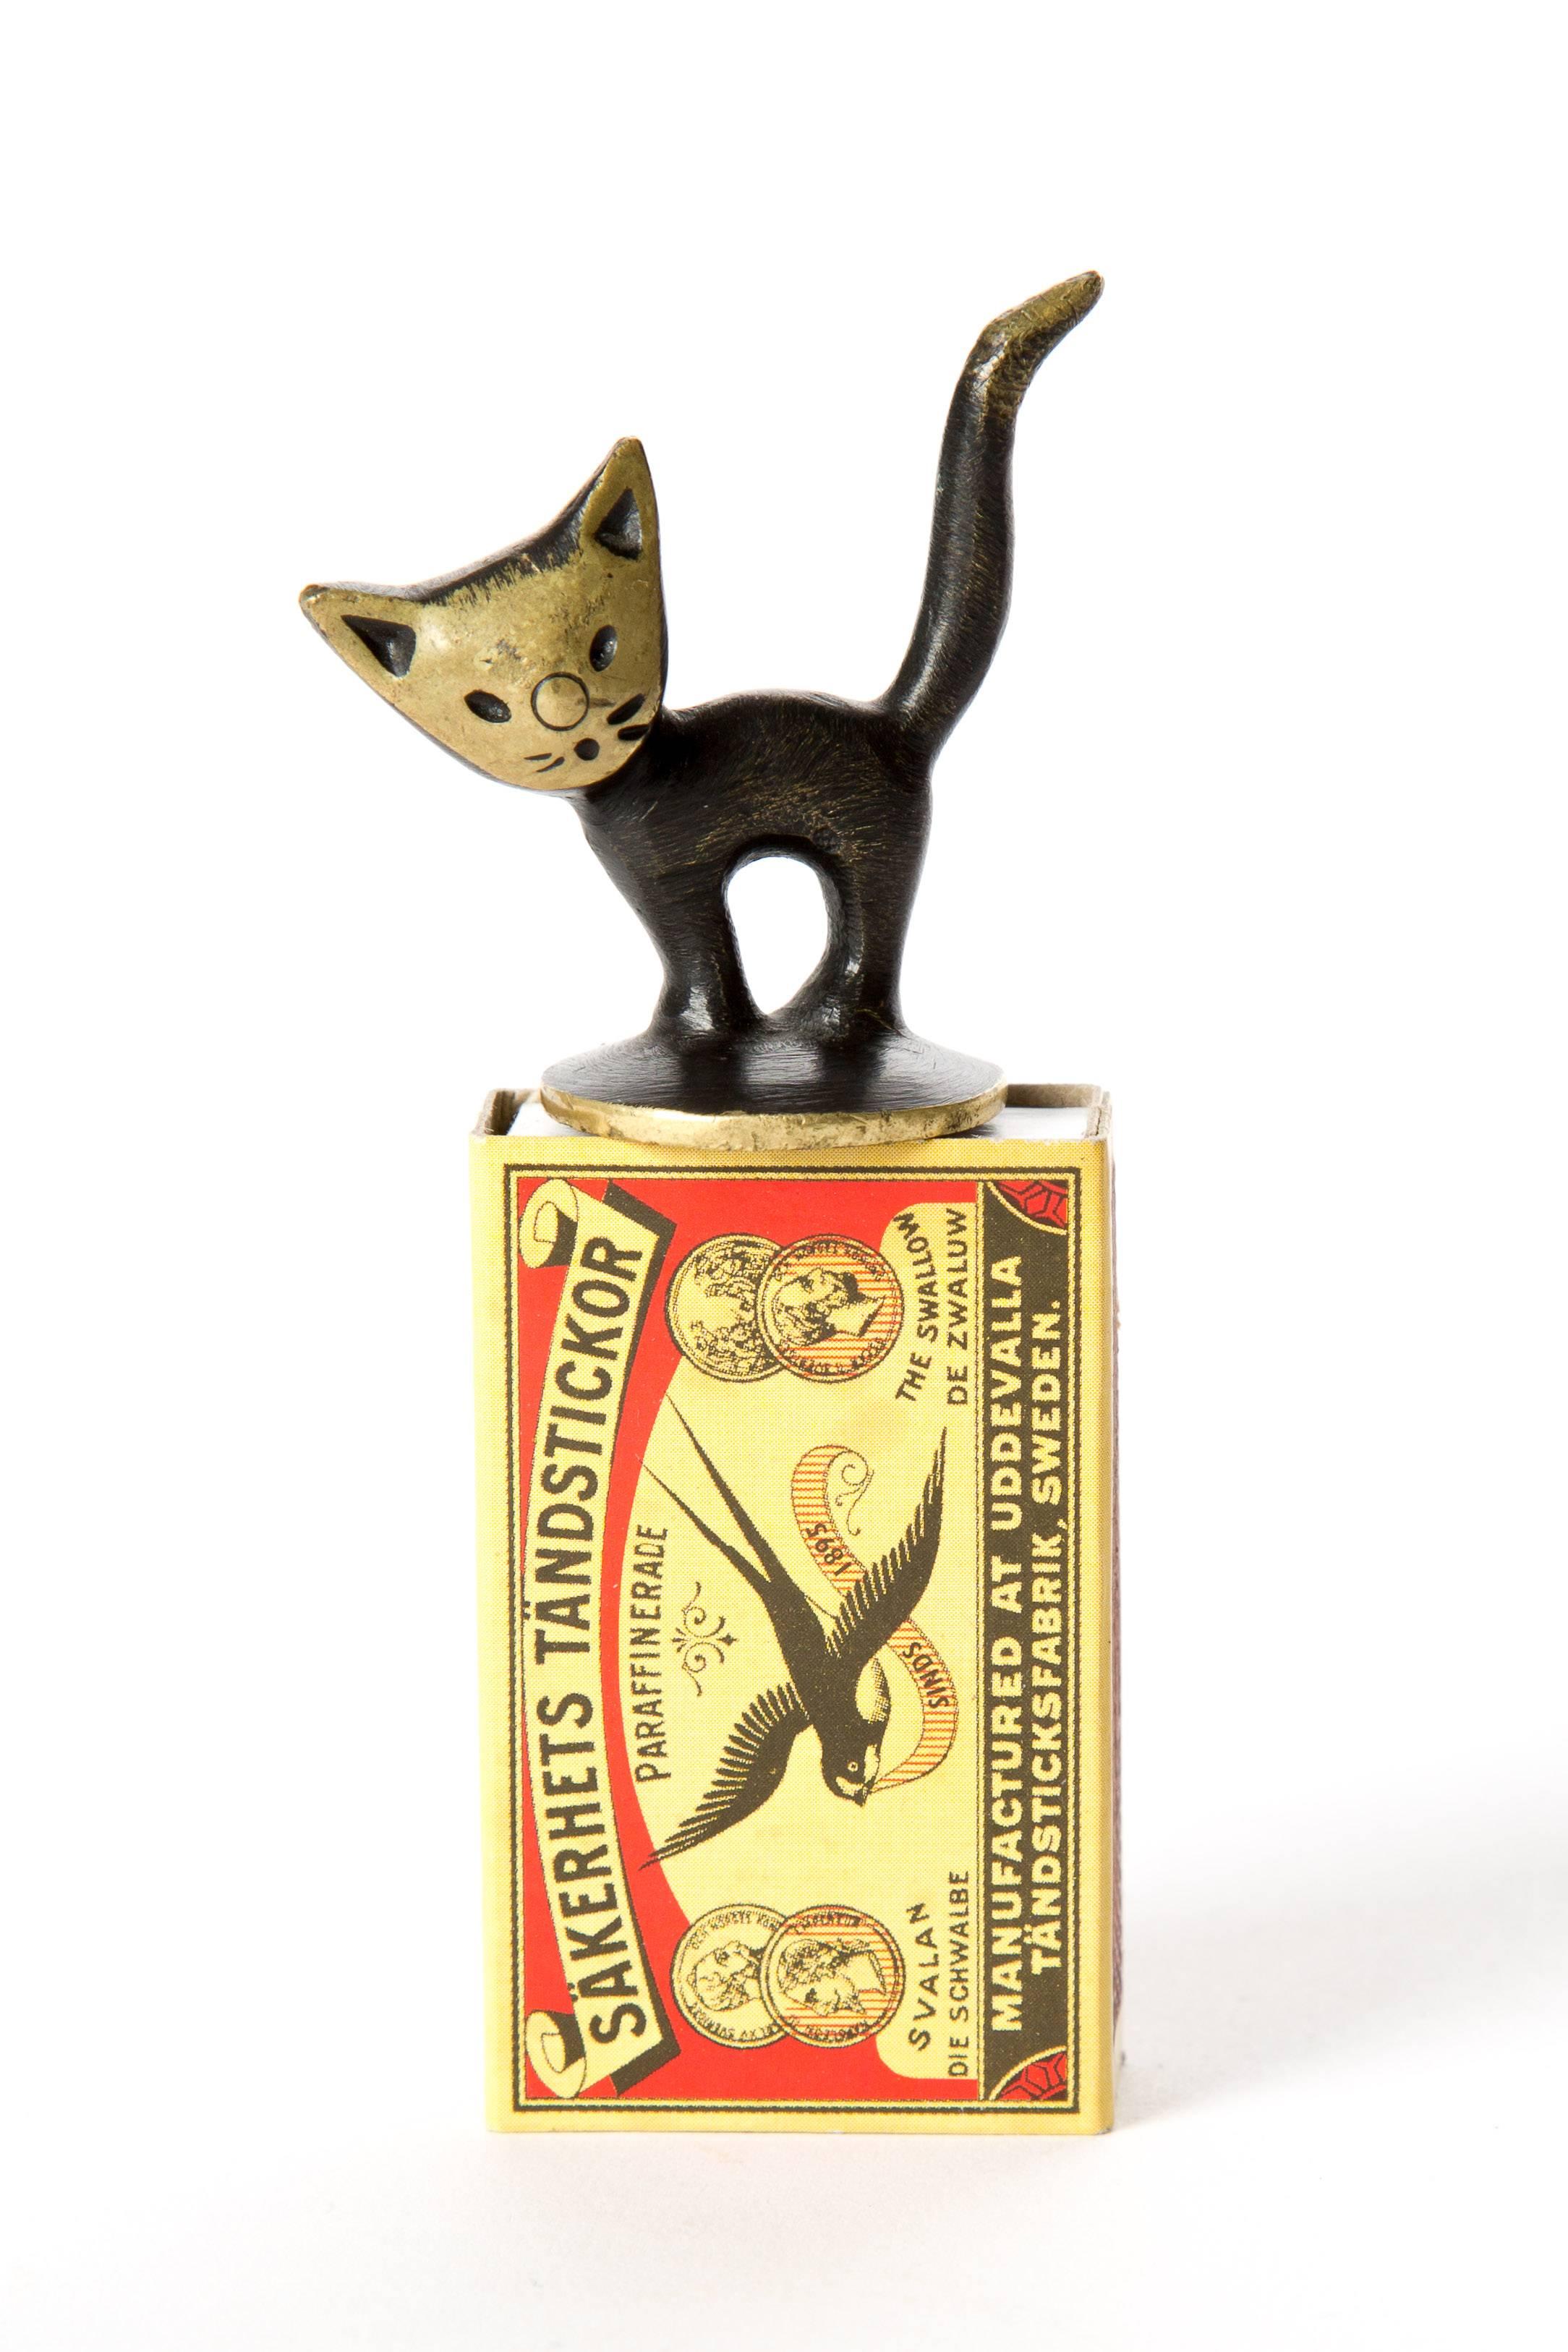 Brass kitten cat Walter Bosse. Young kitten made of blackened brass. There is a stamp underneath. Baller Austria. Probably made for extinguish fire of a cigarette.